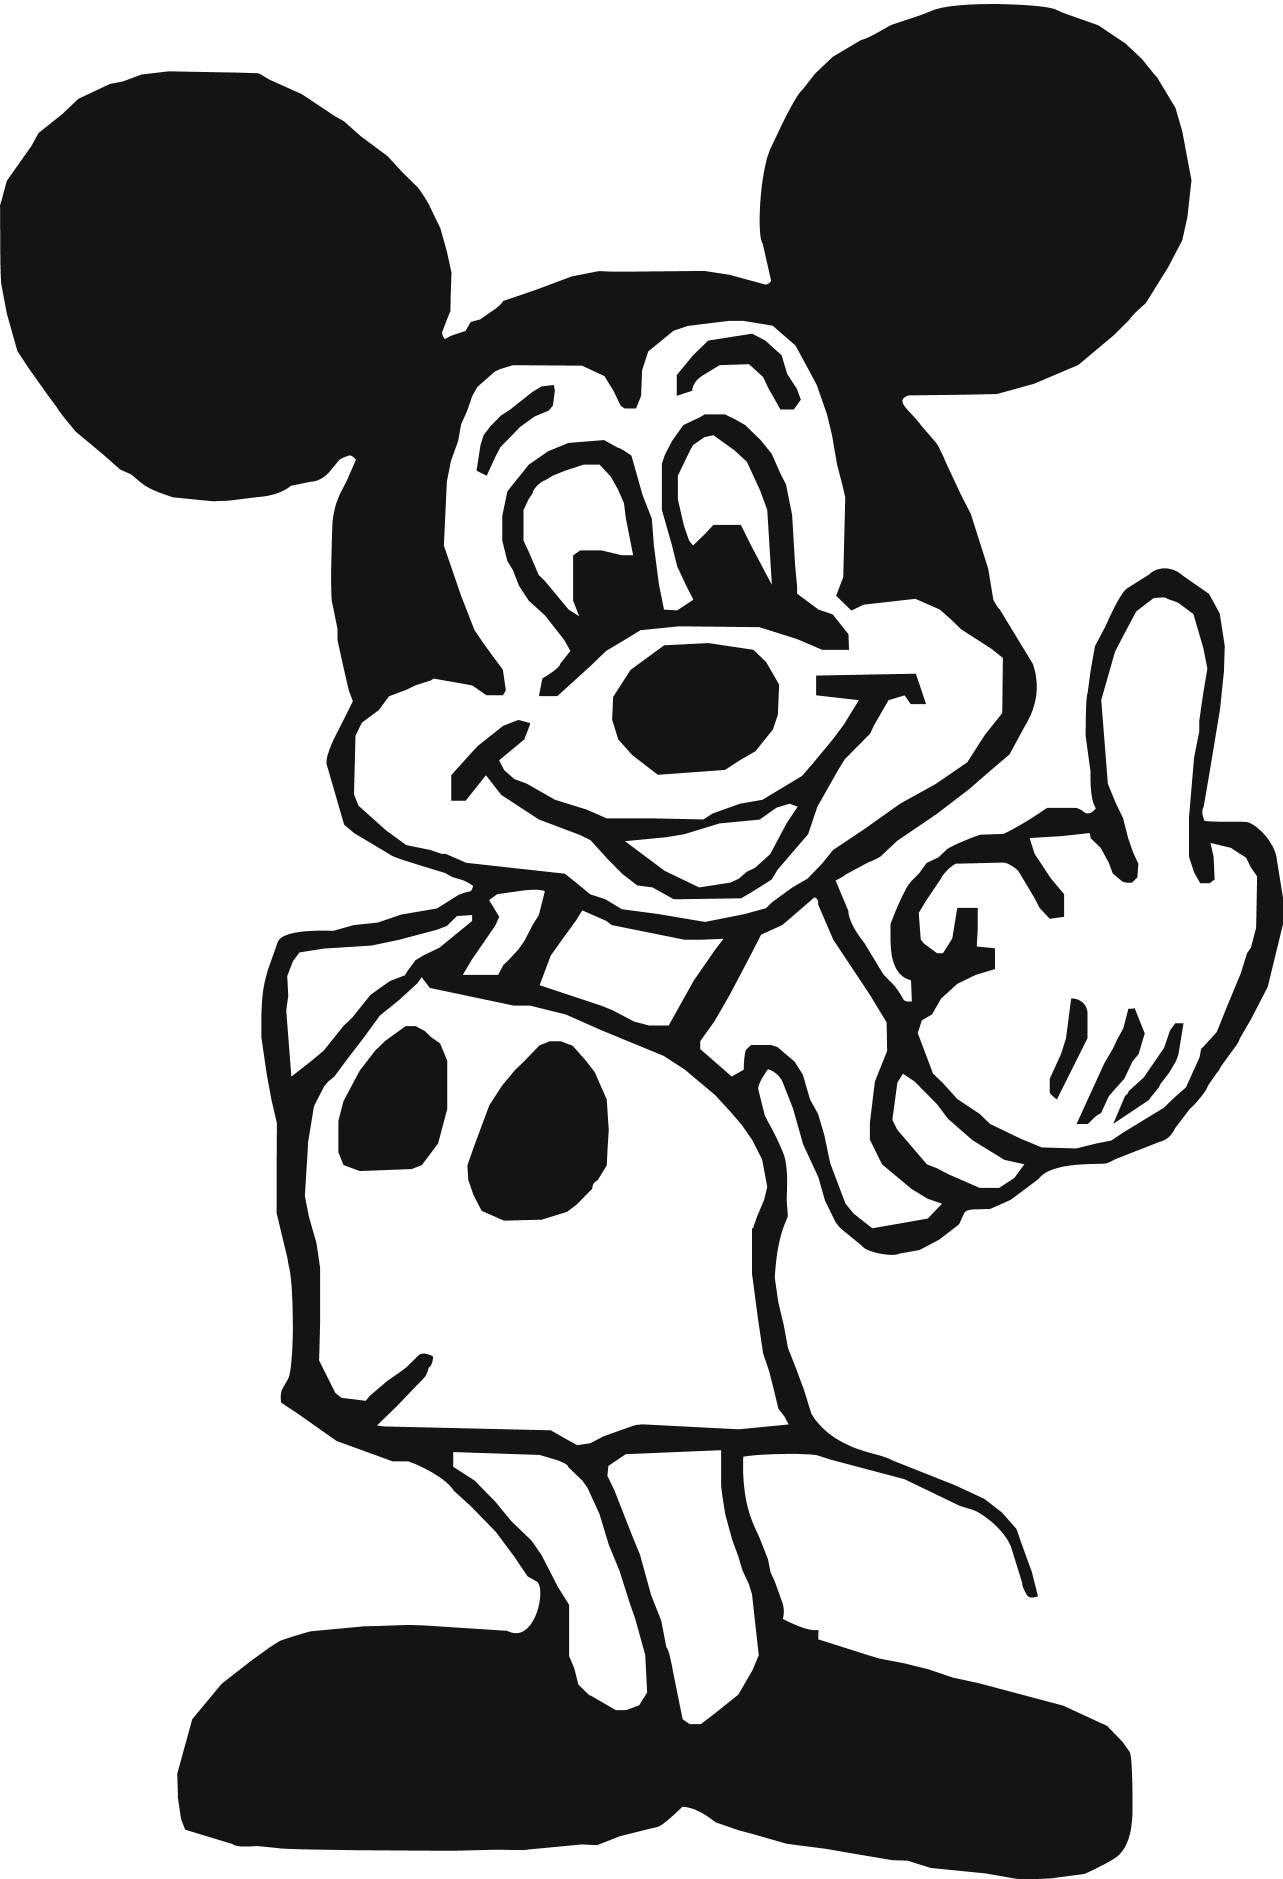 Cool Mickey Mouse Wallpapers